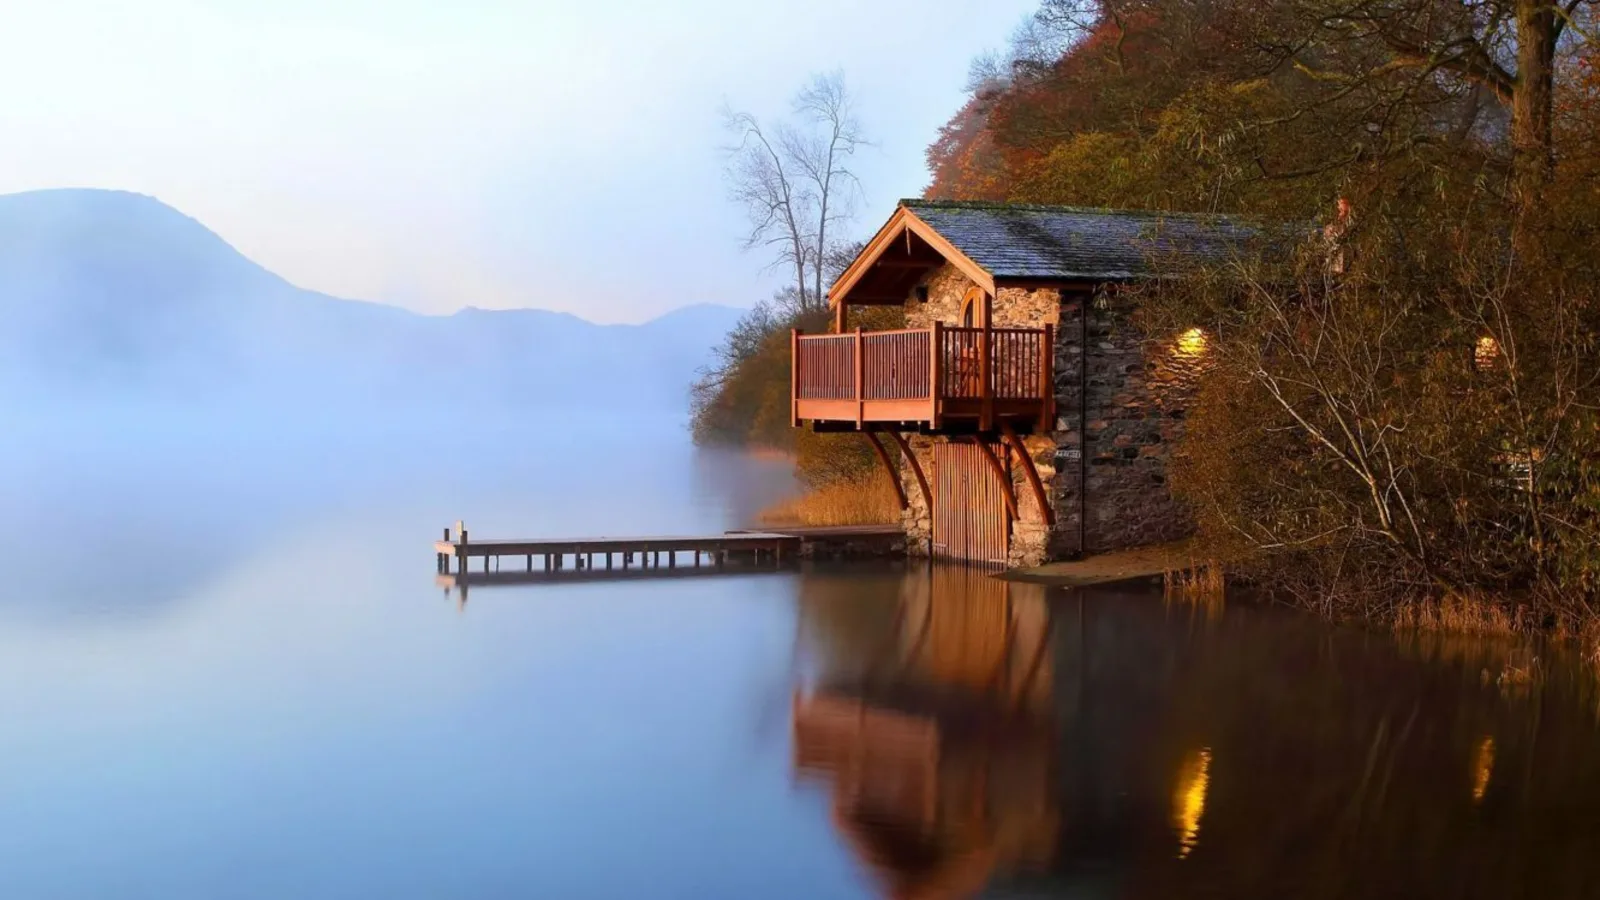 9 Fun Dock Type Ideas You Should Consider for a Lake House